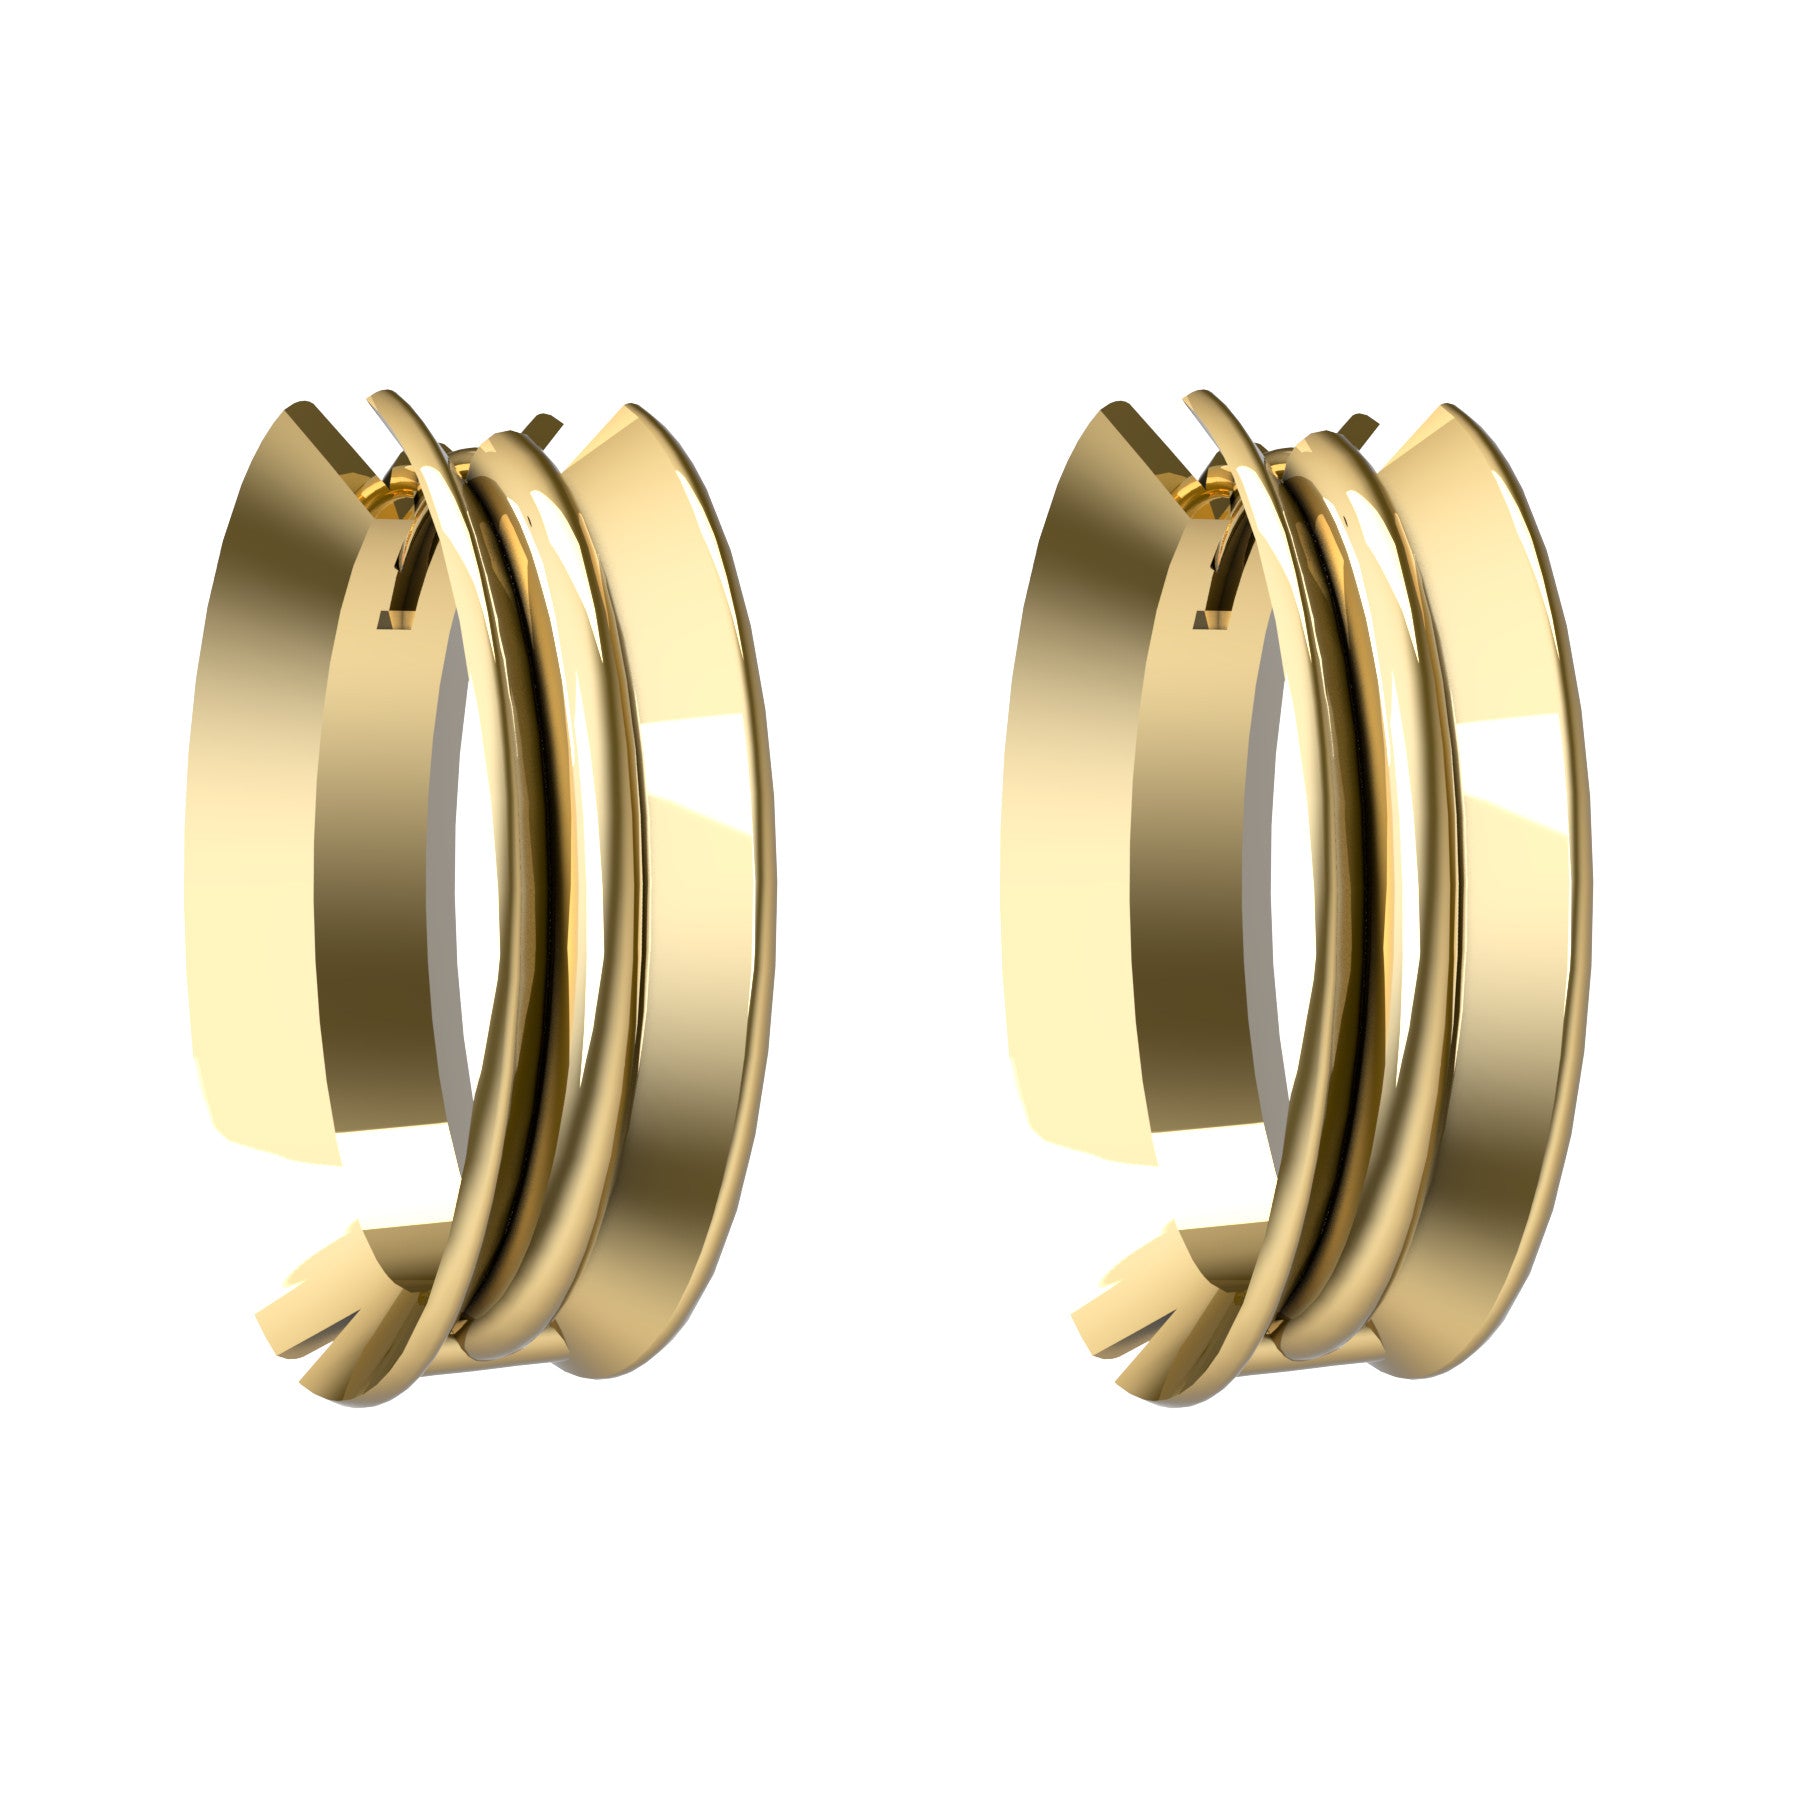 bobo oval earrings, 18 K yellow gold, weight about 10,6 g (0.37 oz), size 23,5x13,8x8 mm 